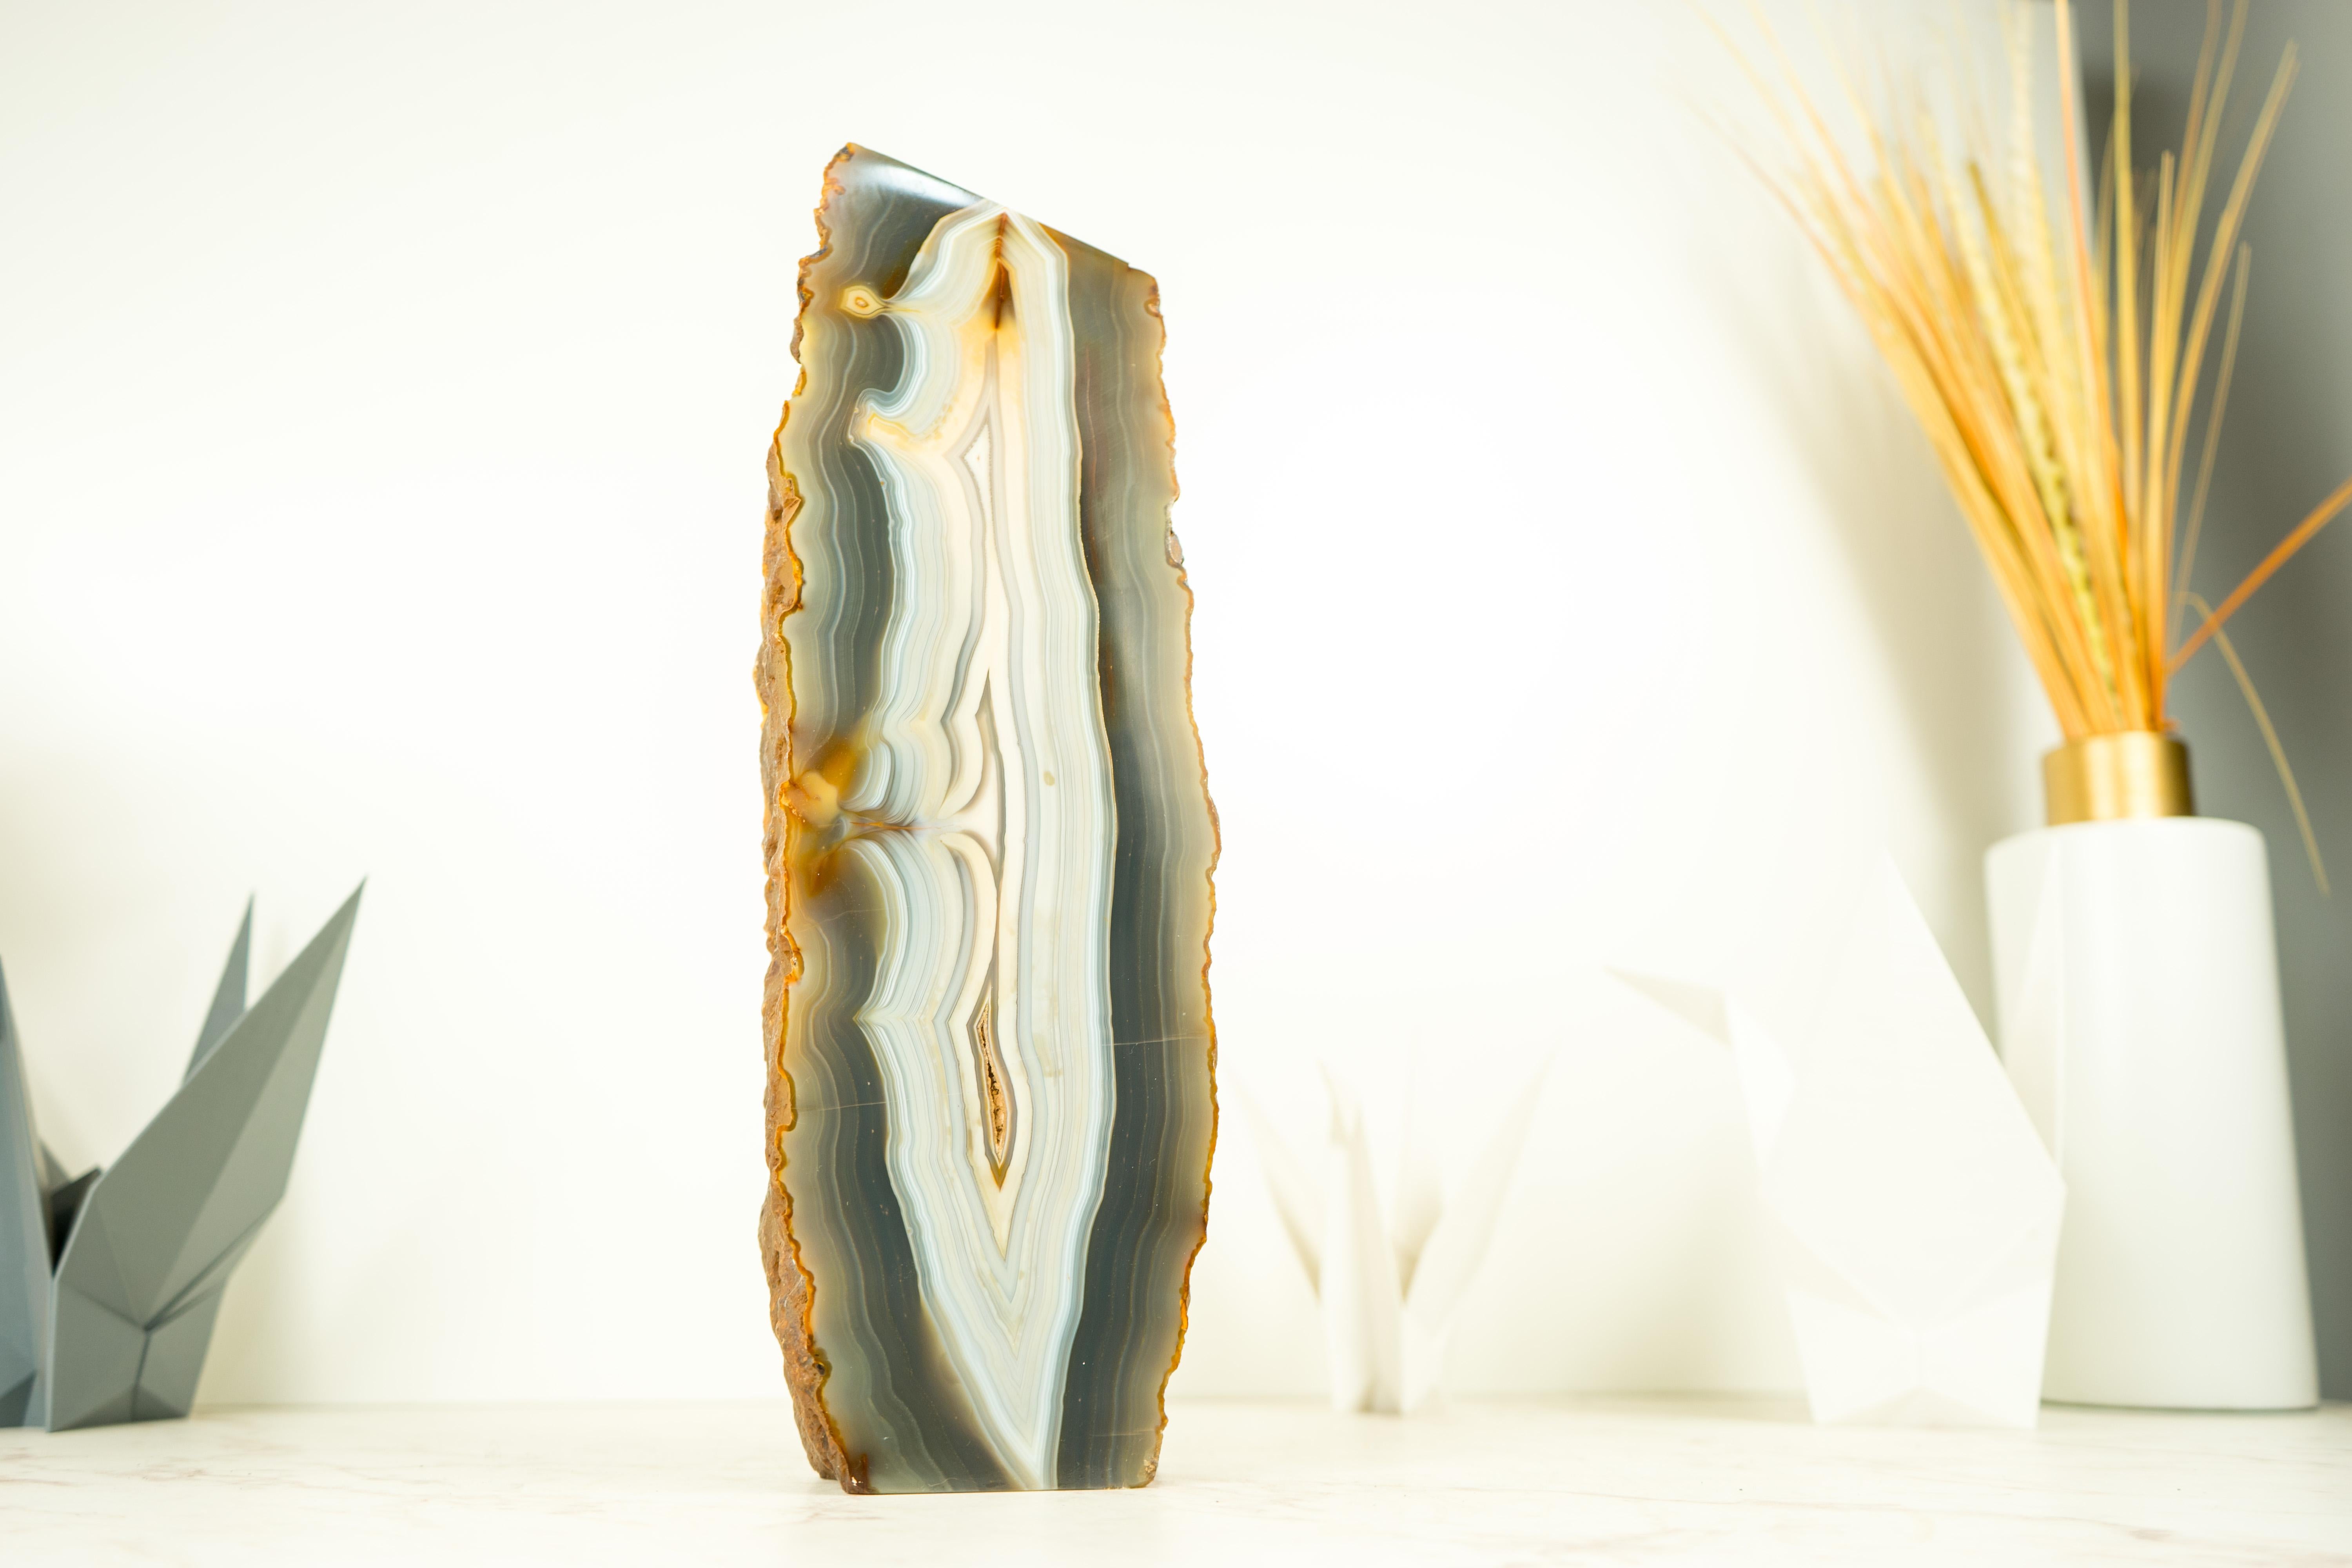 Rare Lace Agate Geode, The Perfect Untreated Agate with the Rarest Colors

• Description

A gorgeous medium-sized Banded Agate Geode, this beauty presents us with a one-of-a-kind lace agate formation with complex yet simple lines that represent the